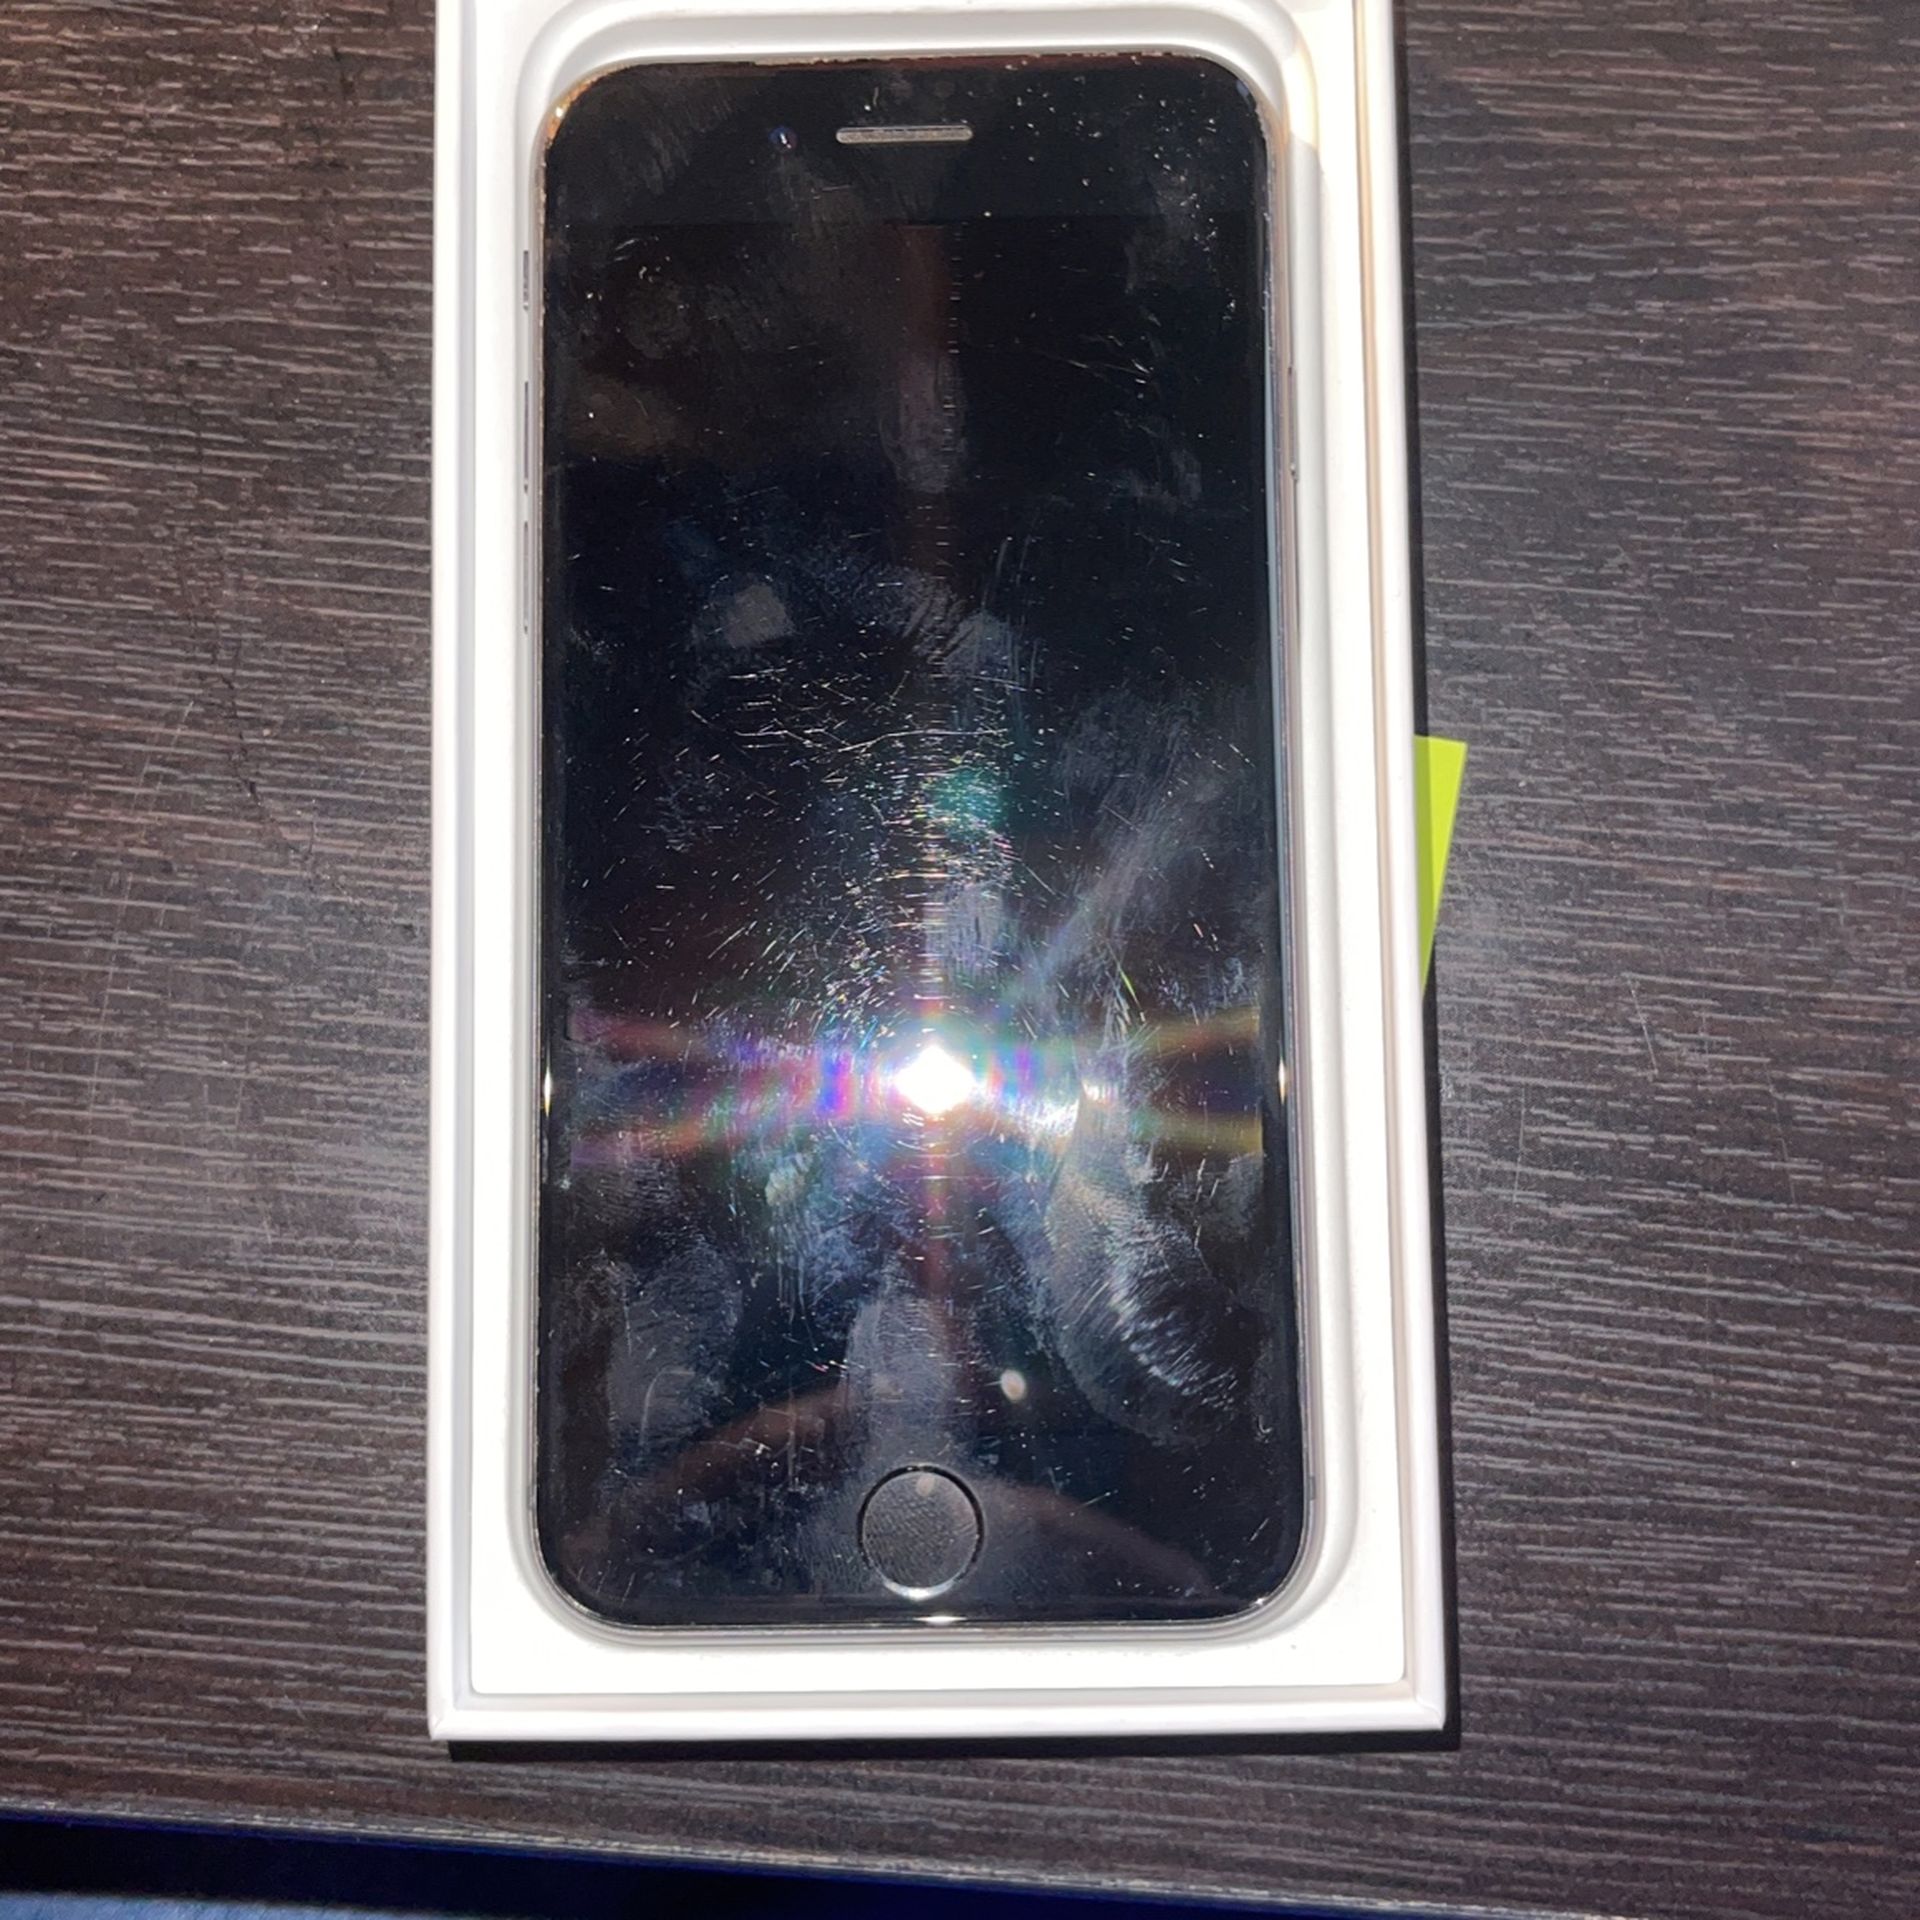 IPhone 8 Great Condition